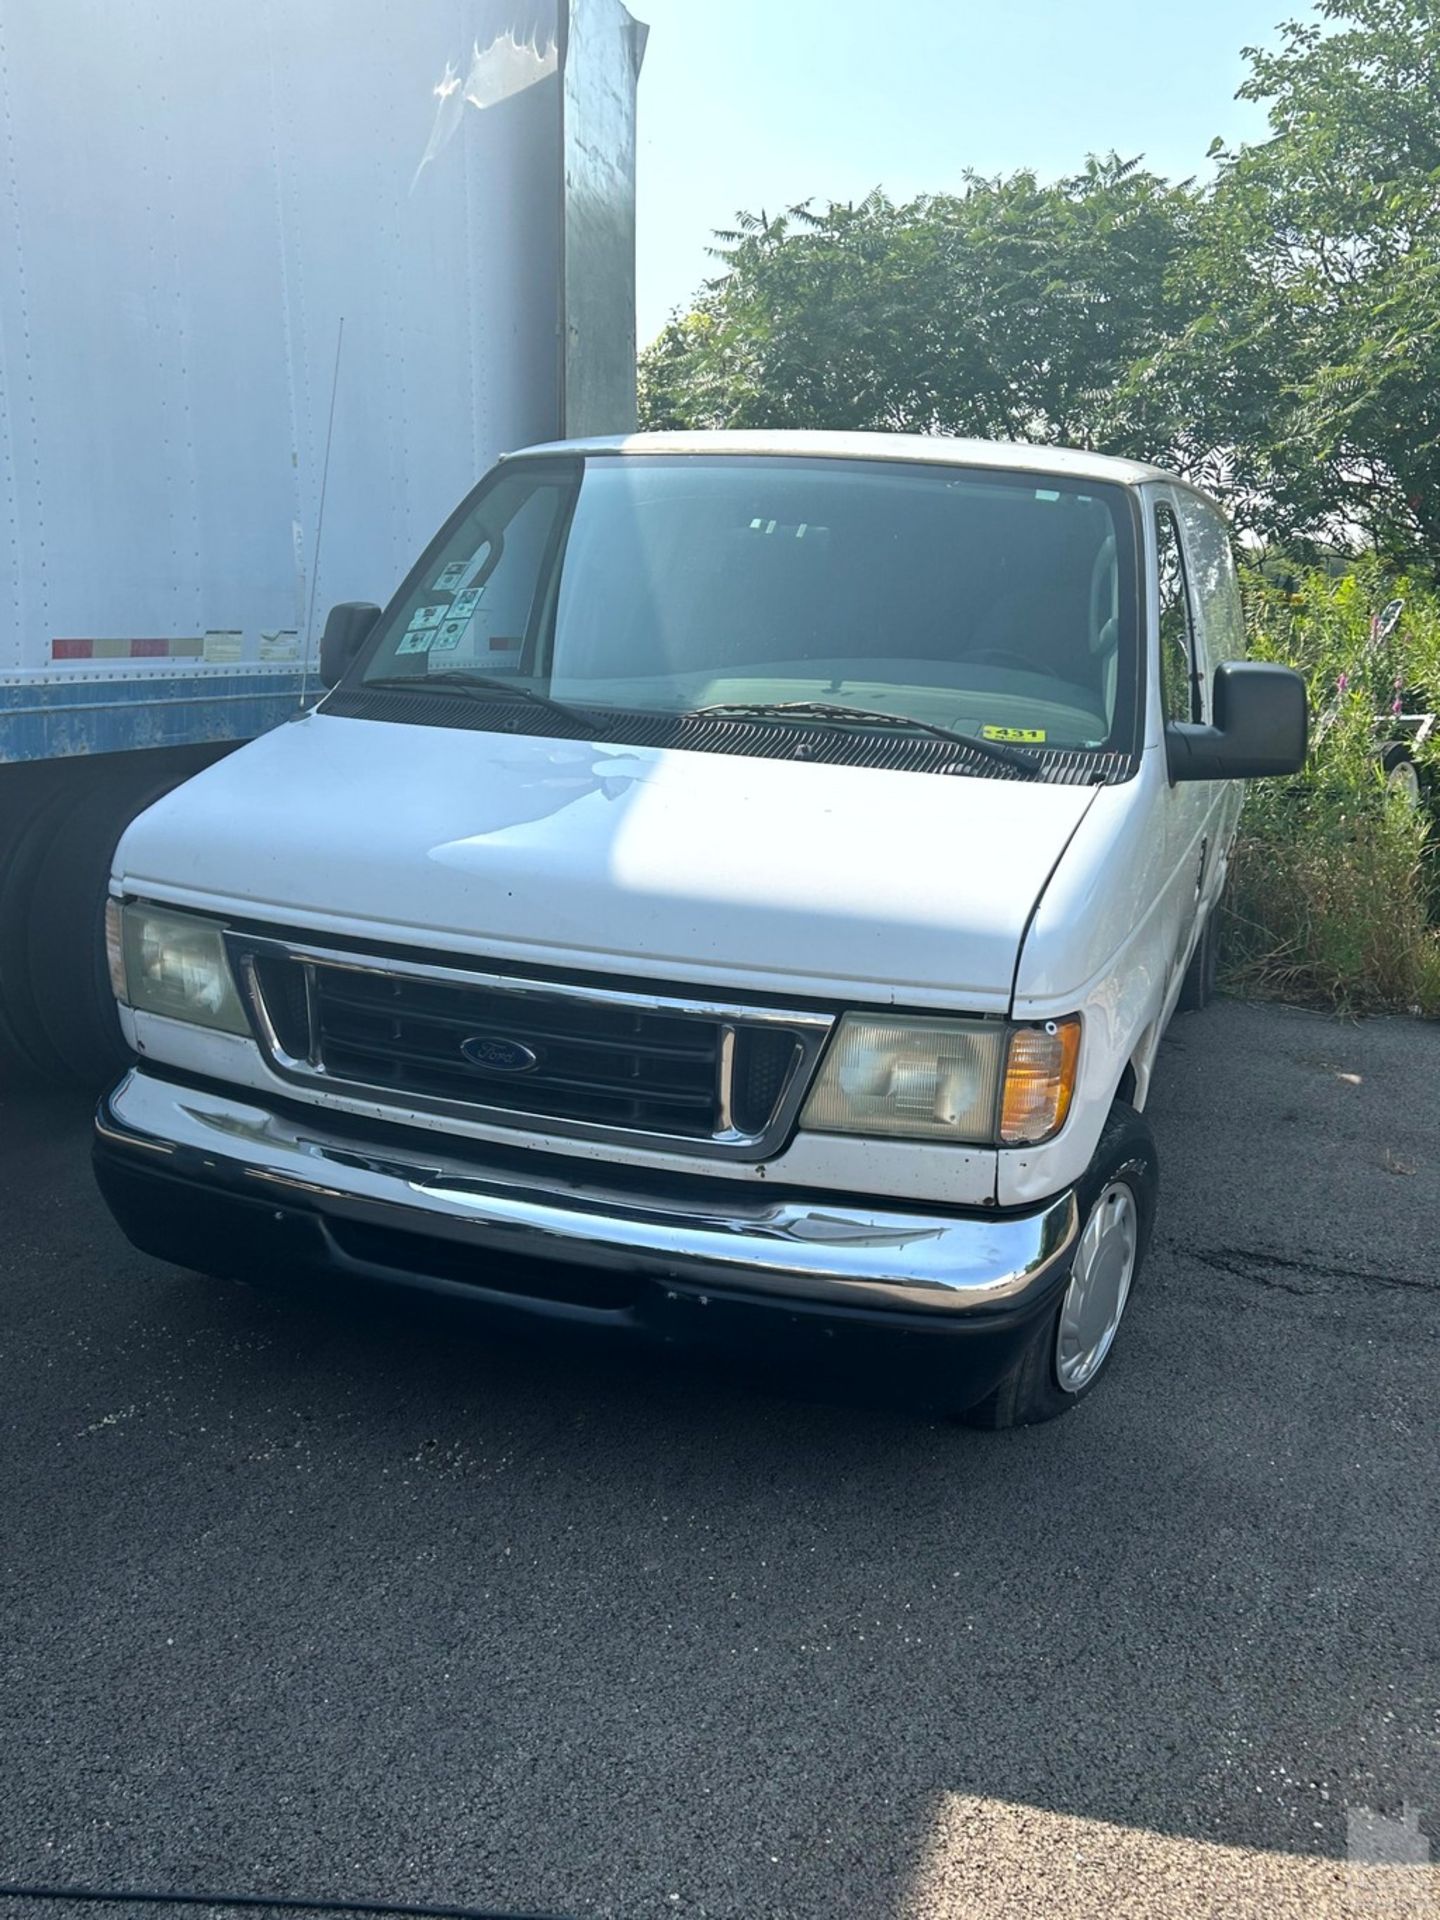 2002 FORD E150 VAN VIN: 1FTRE14253HA58959 369, 389 MILES V6 GAS 2WD NOT RUNNING WITH TITLE AND KEYS - Image 2 of 8